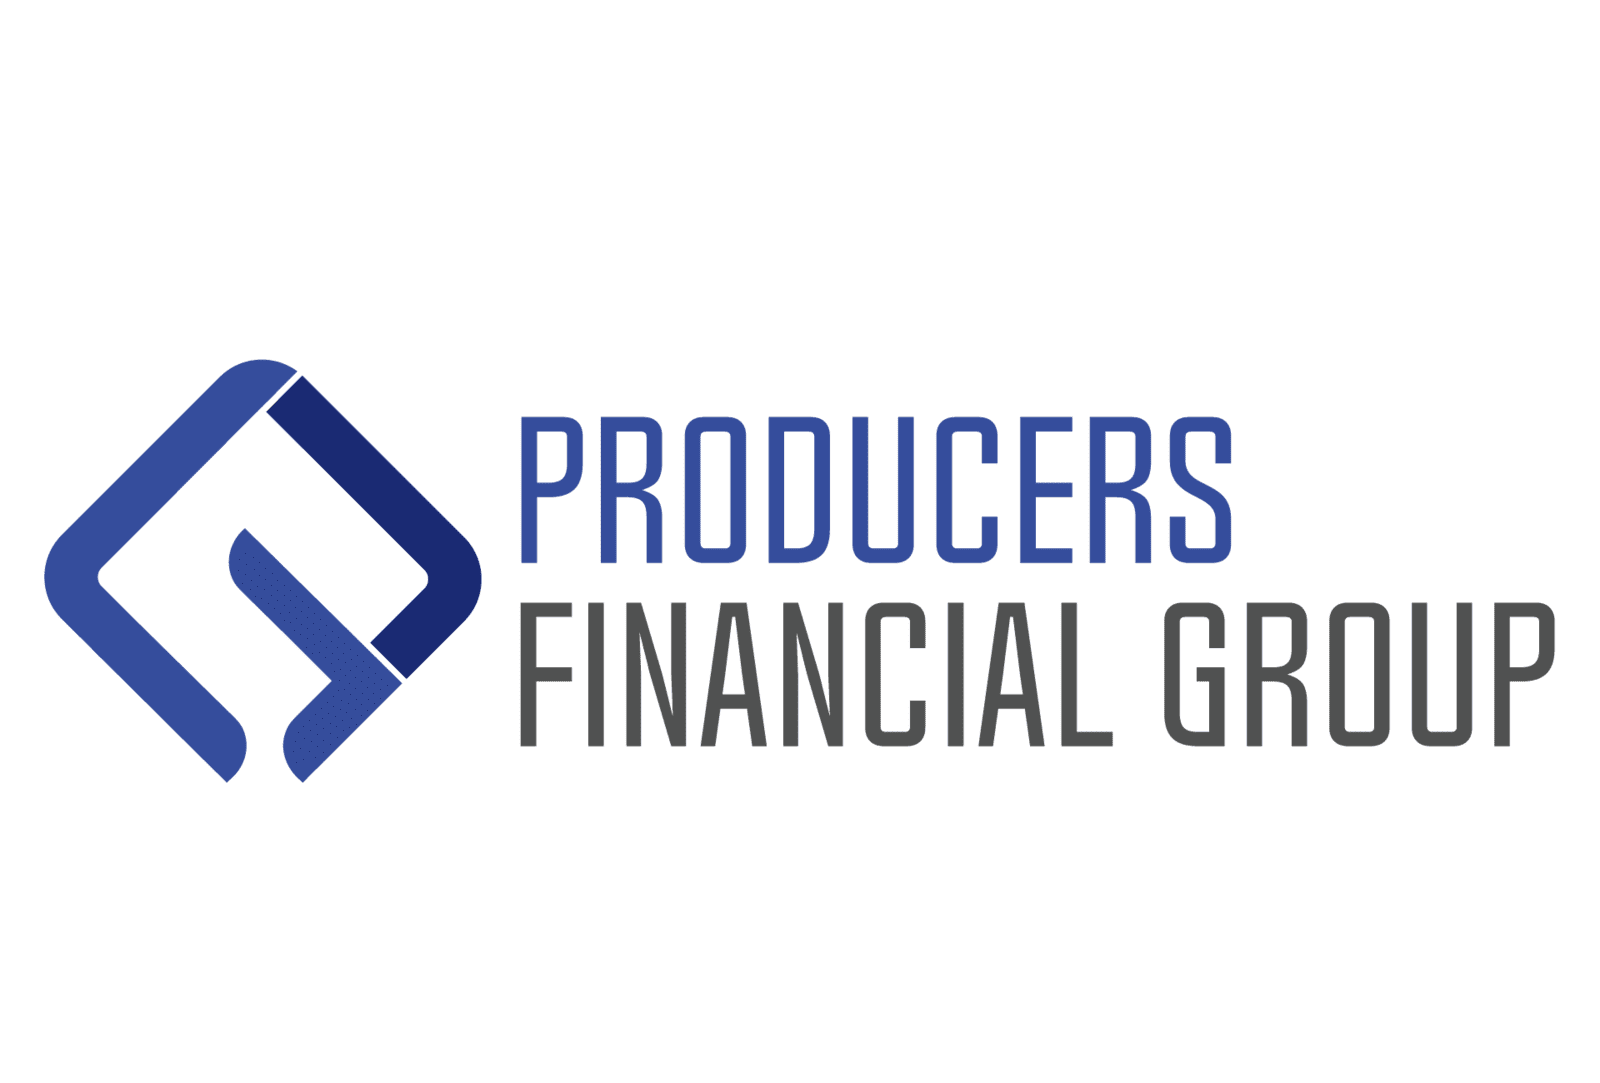 Producers Financial Group